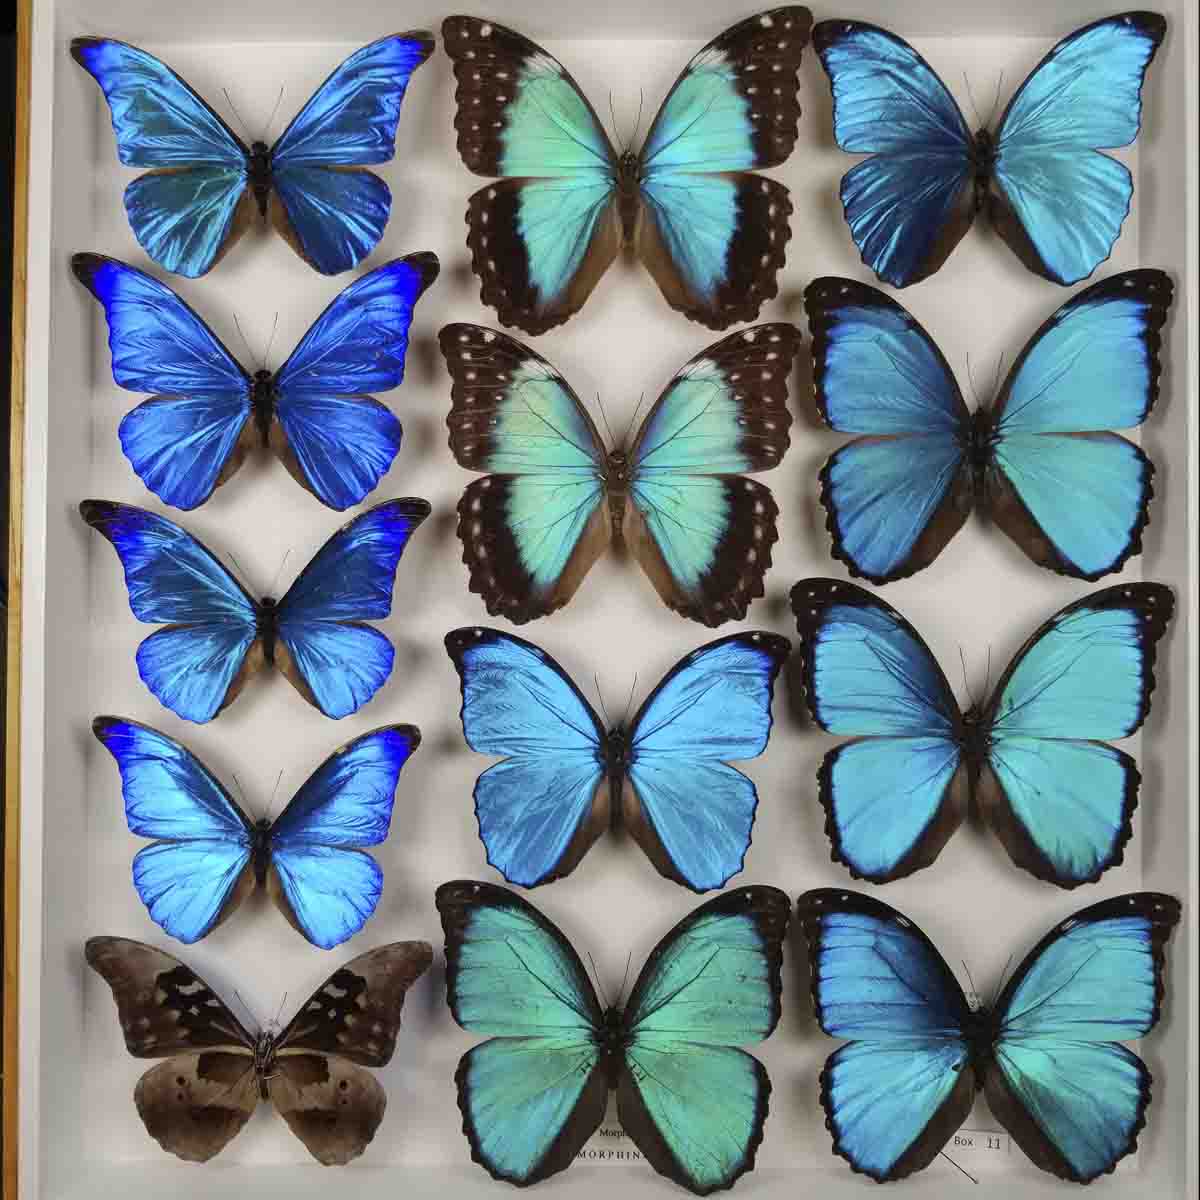 A variety of brown to aqua blue butterflies